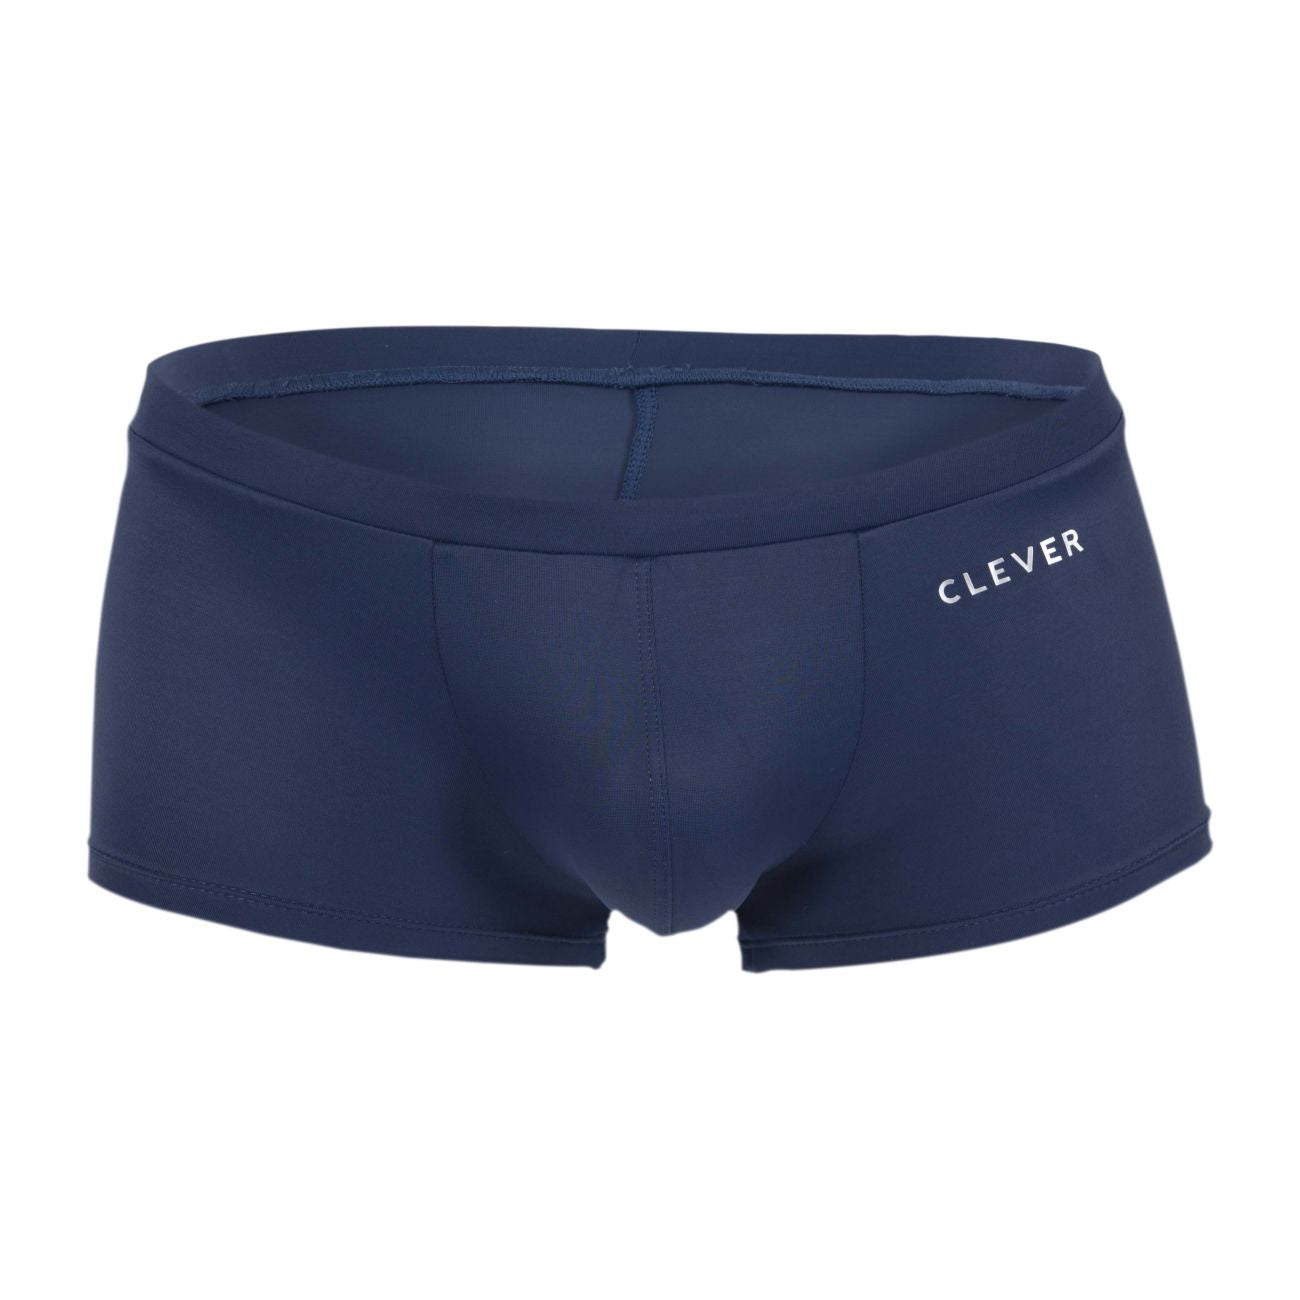 Clever 1451 Purity Trunks